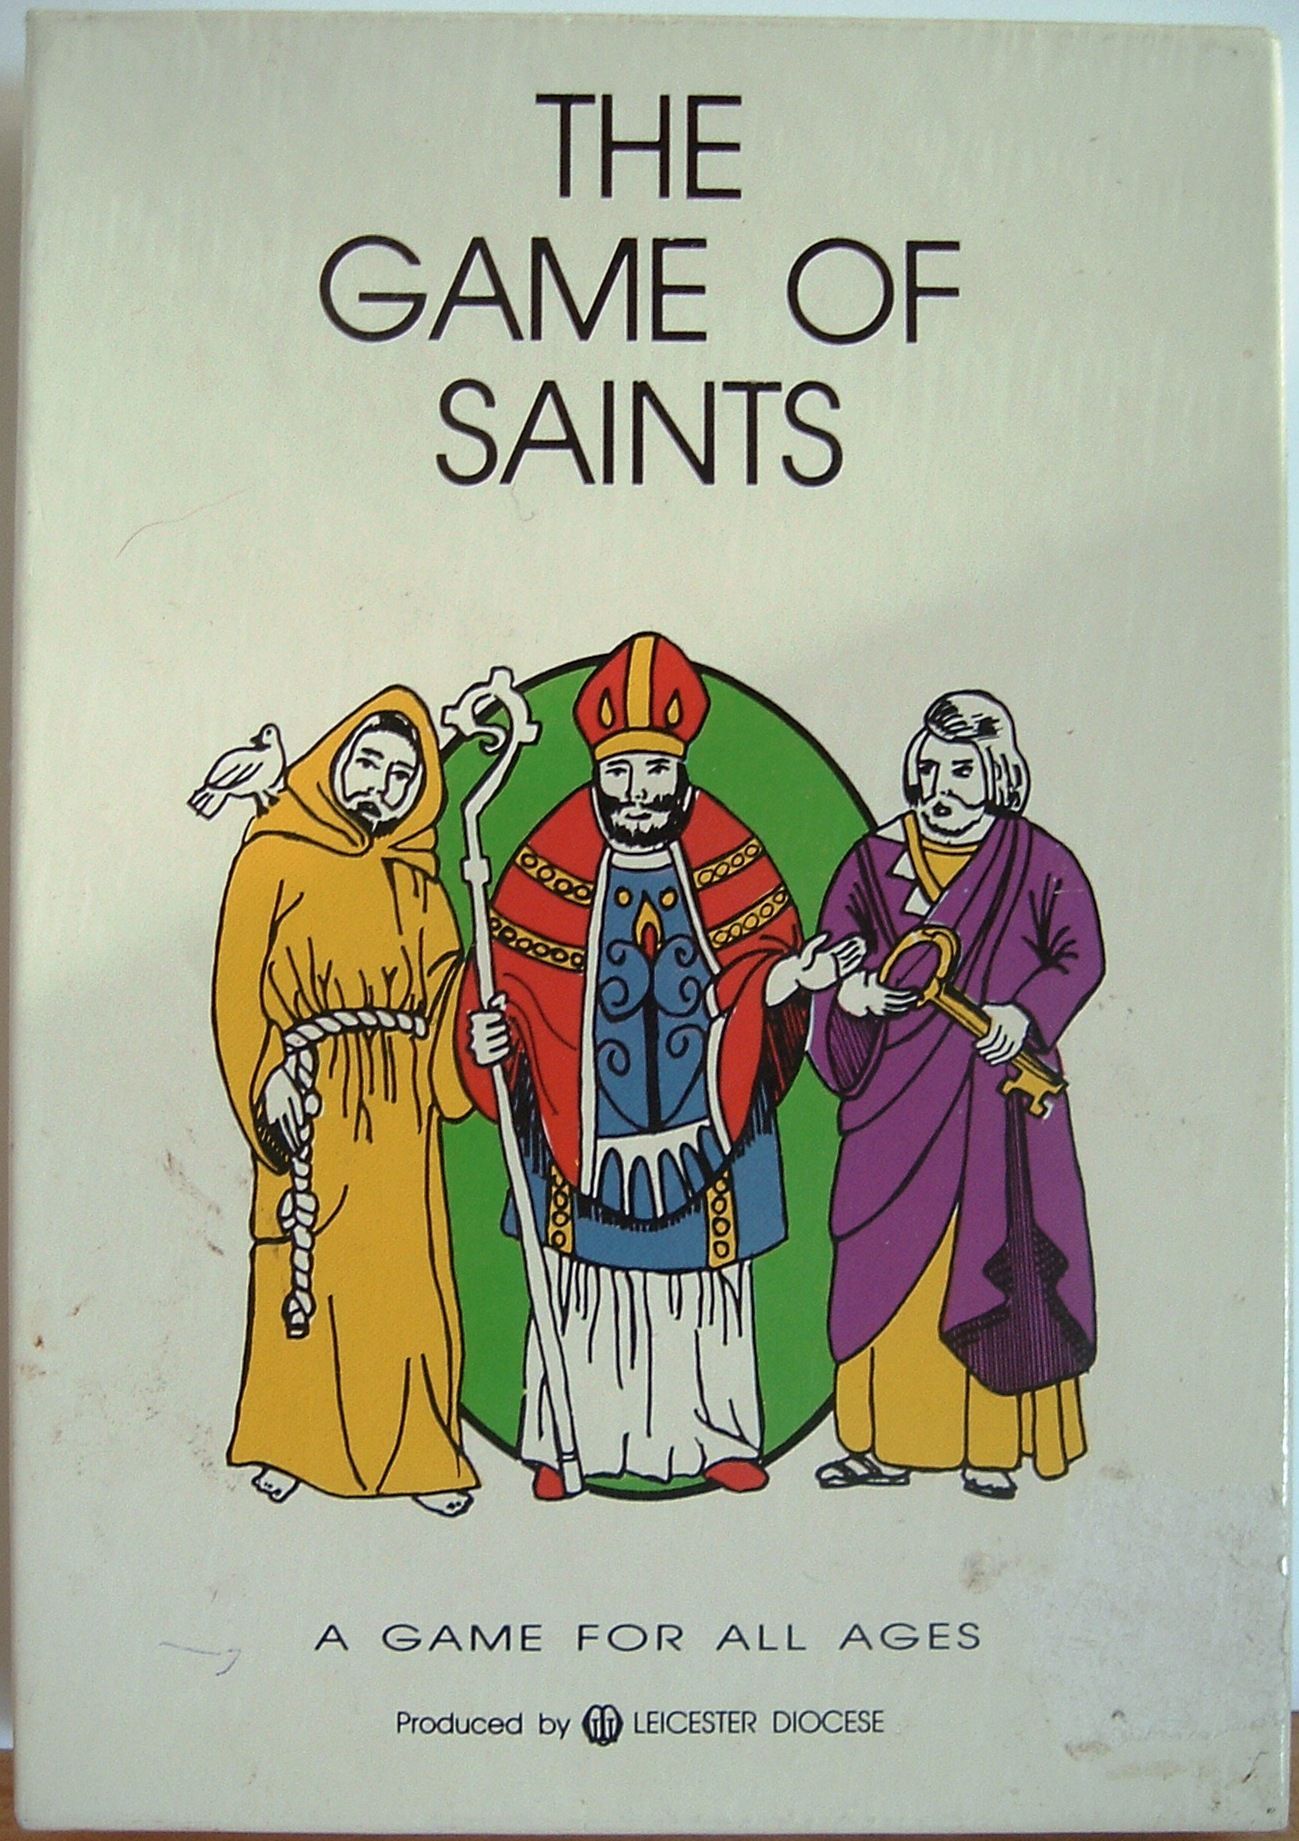 The Game of Saints